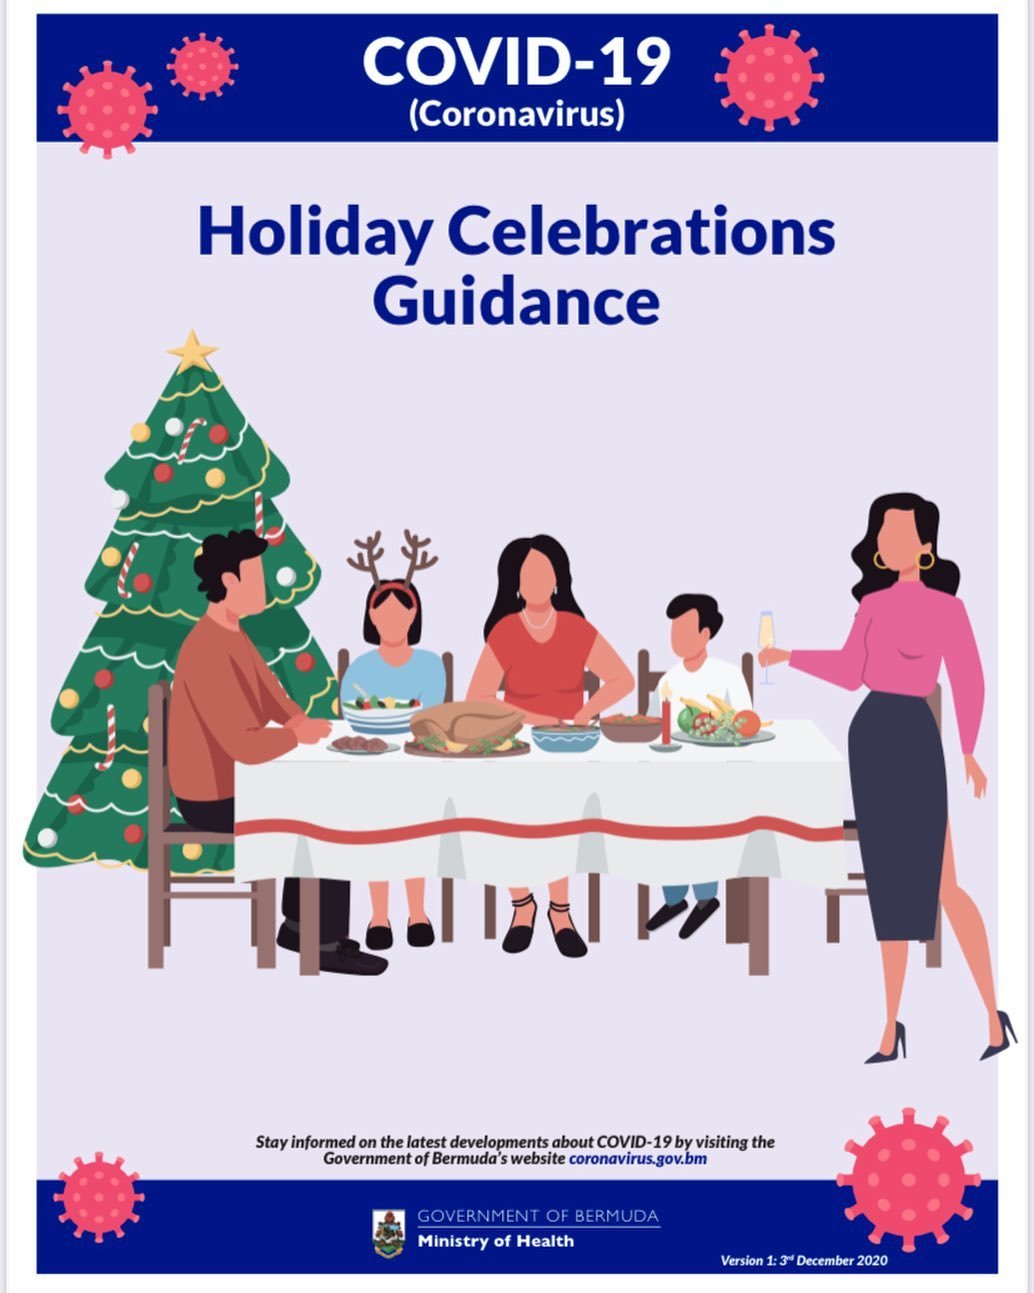 Holiday Celebrations Guidelines to Bermuda during COVID-19